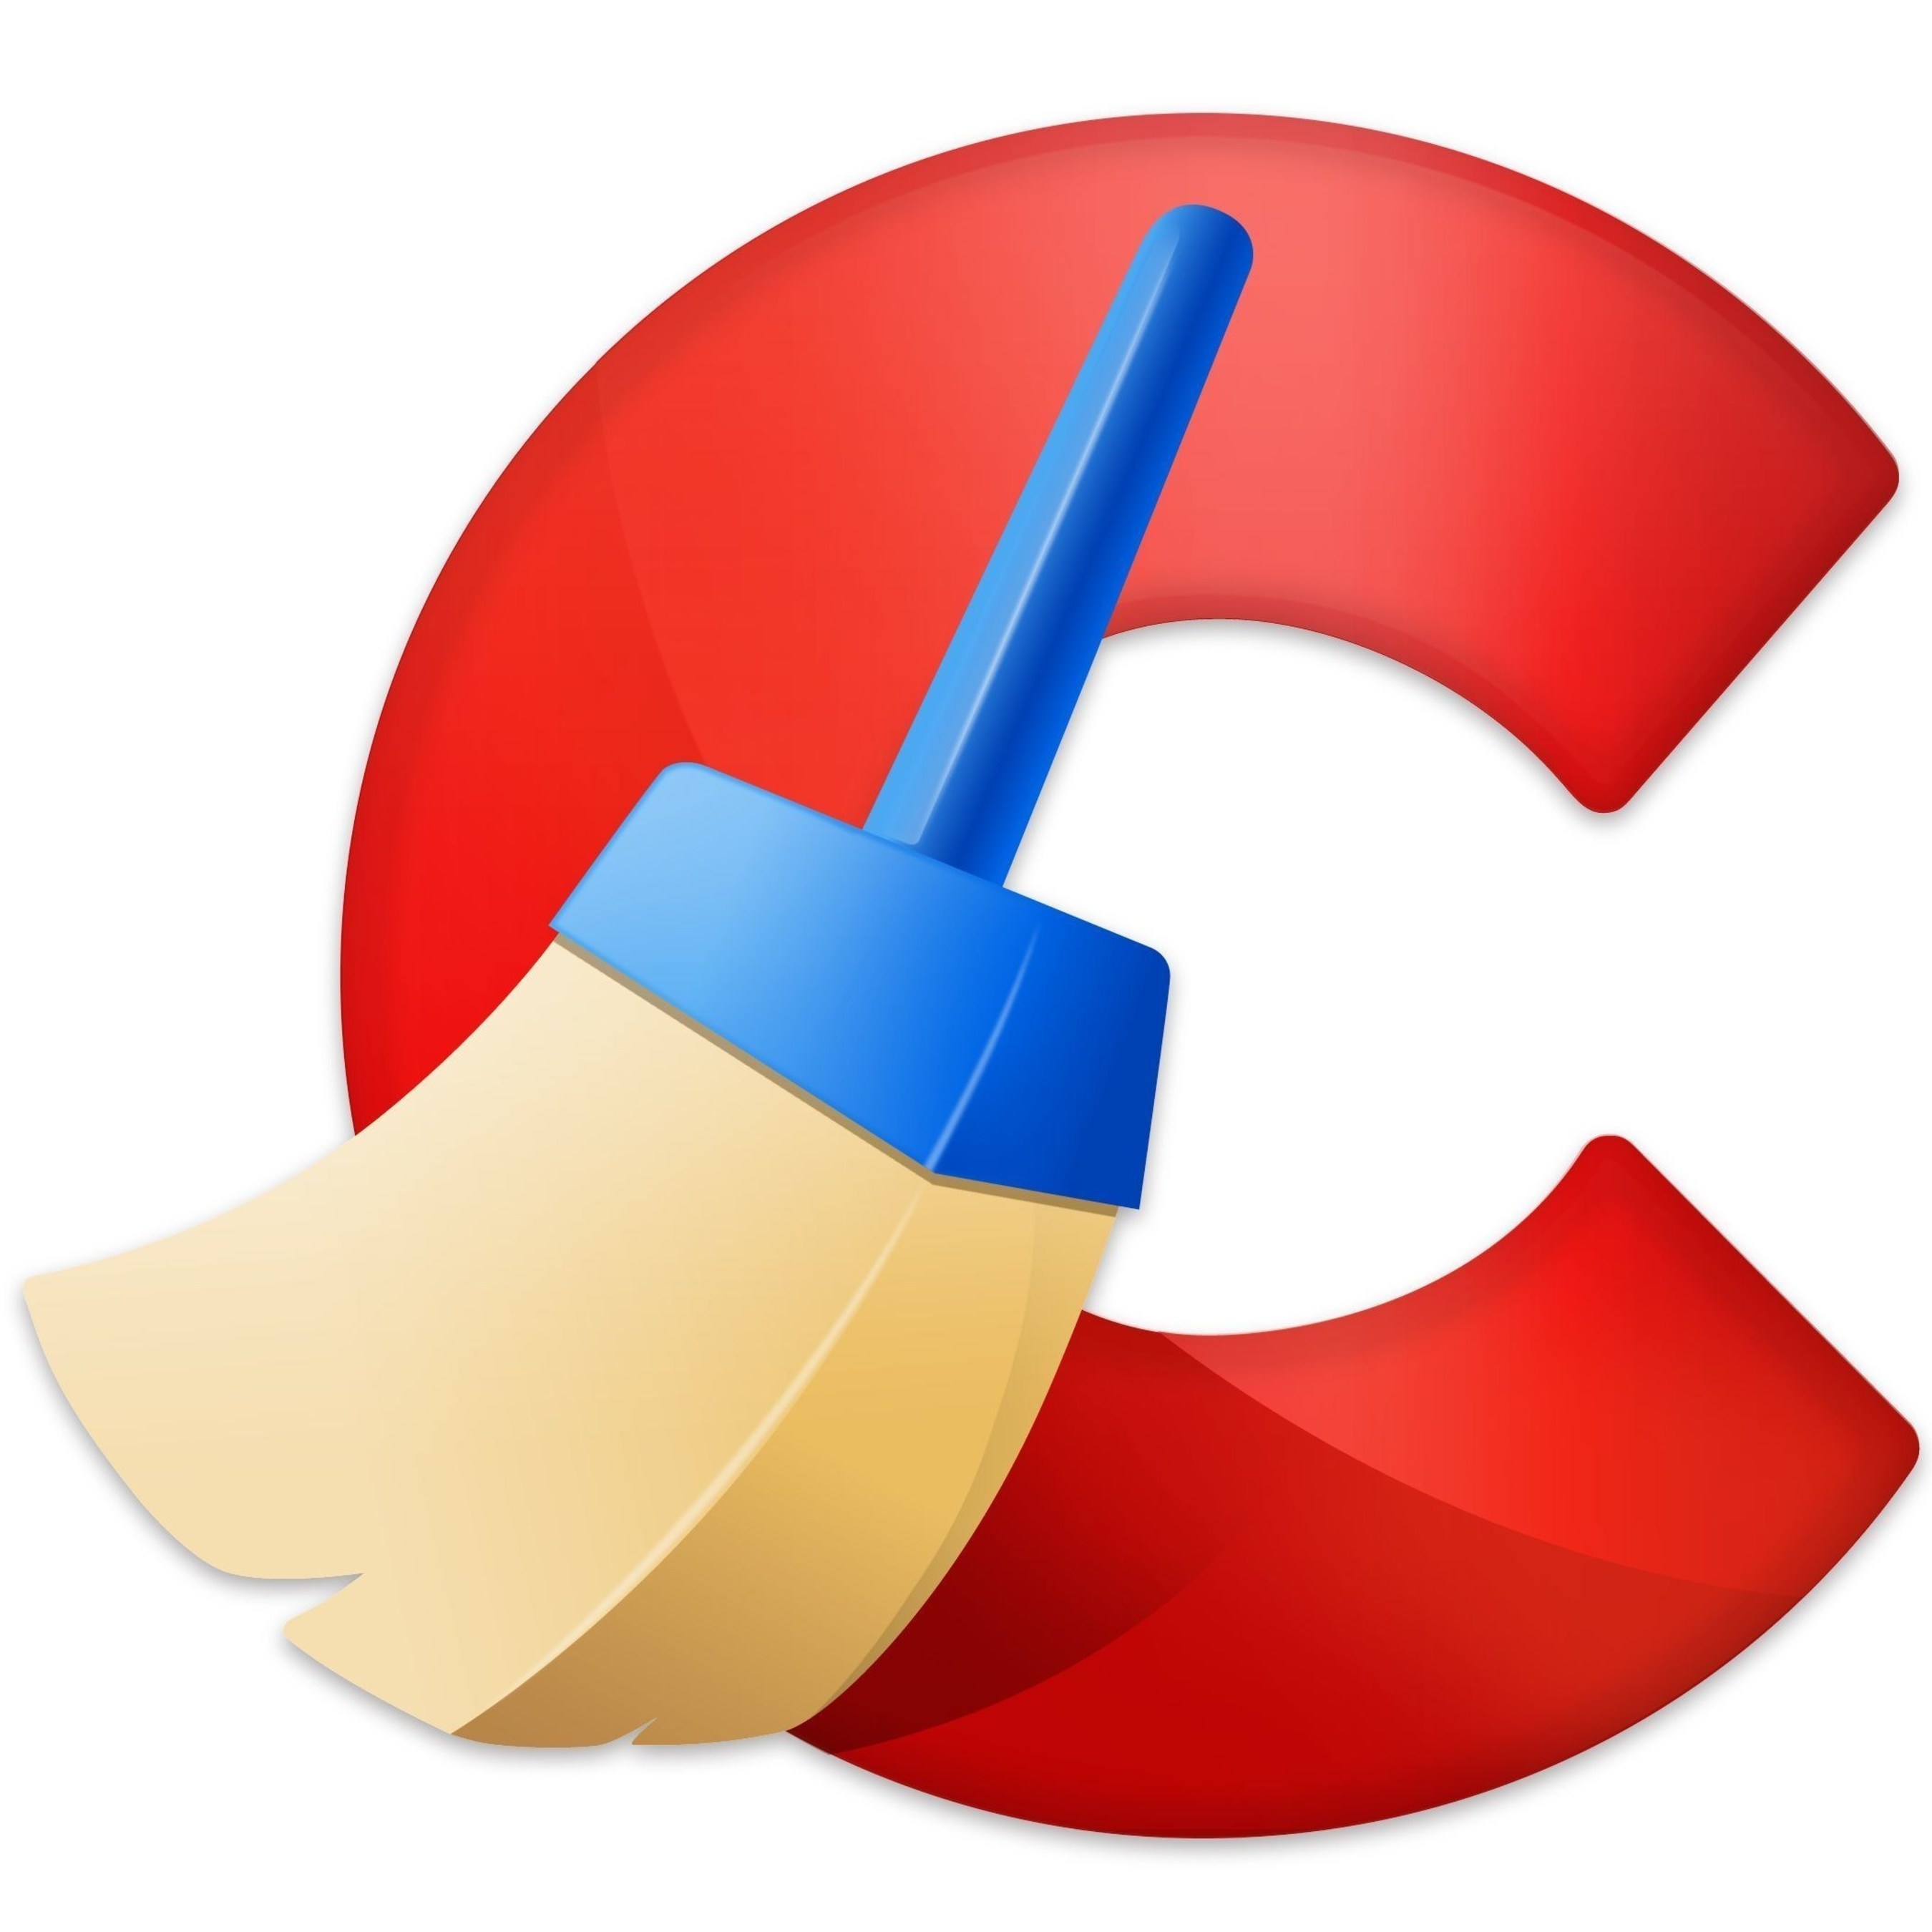 ccleaner download wikipedia